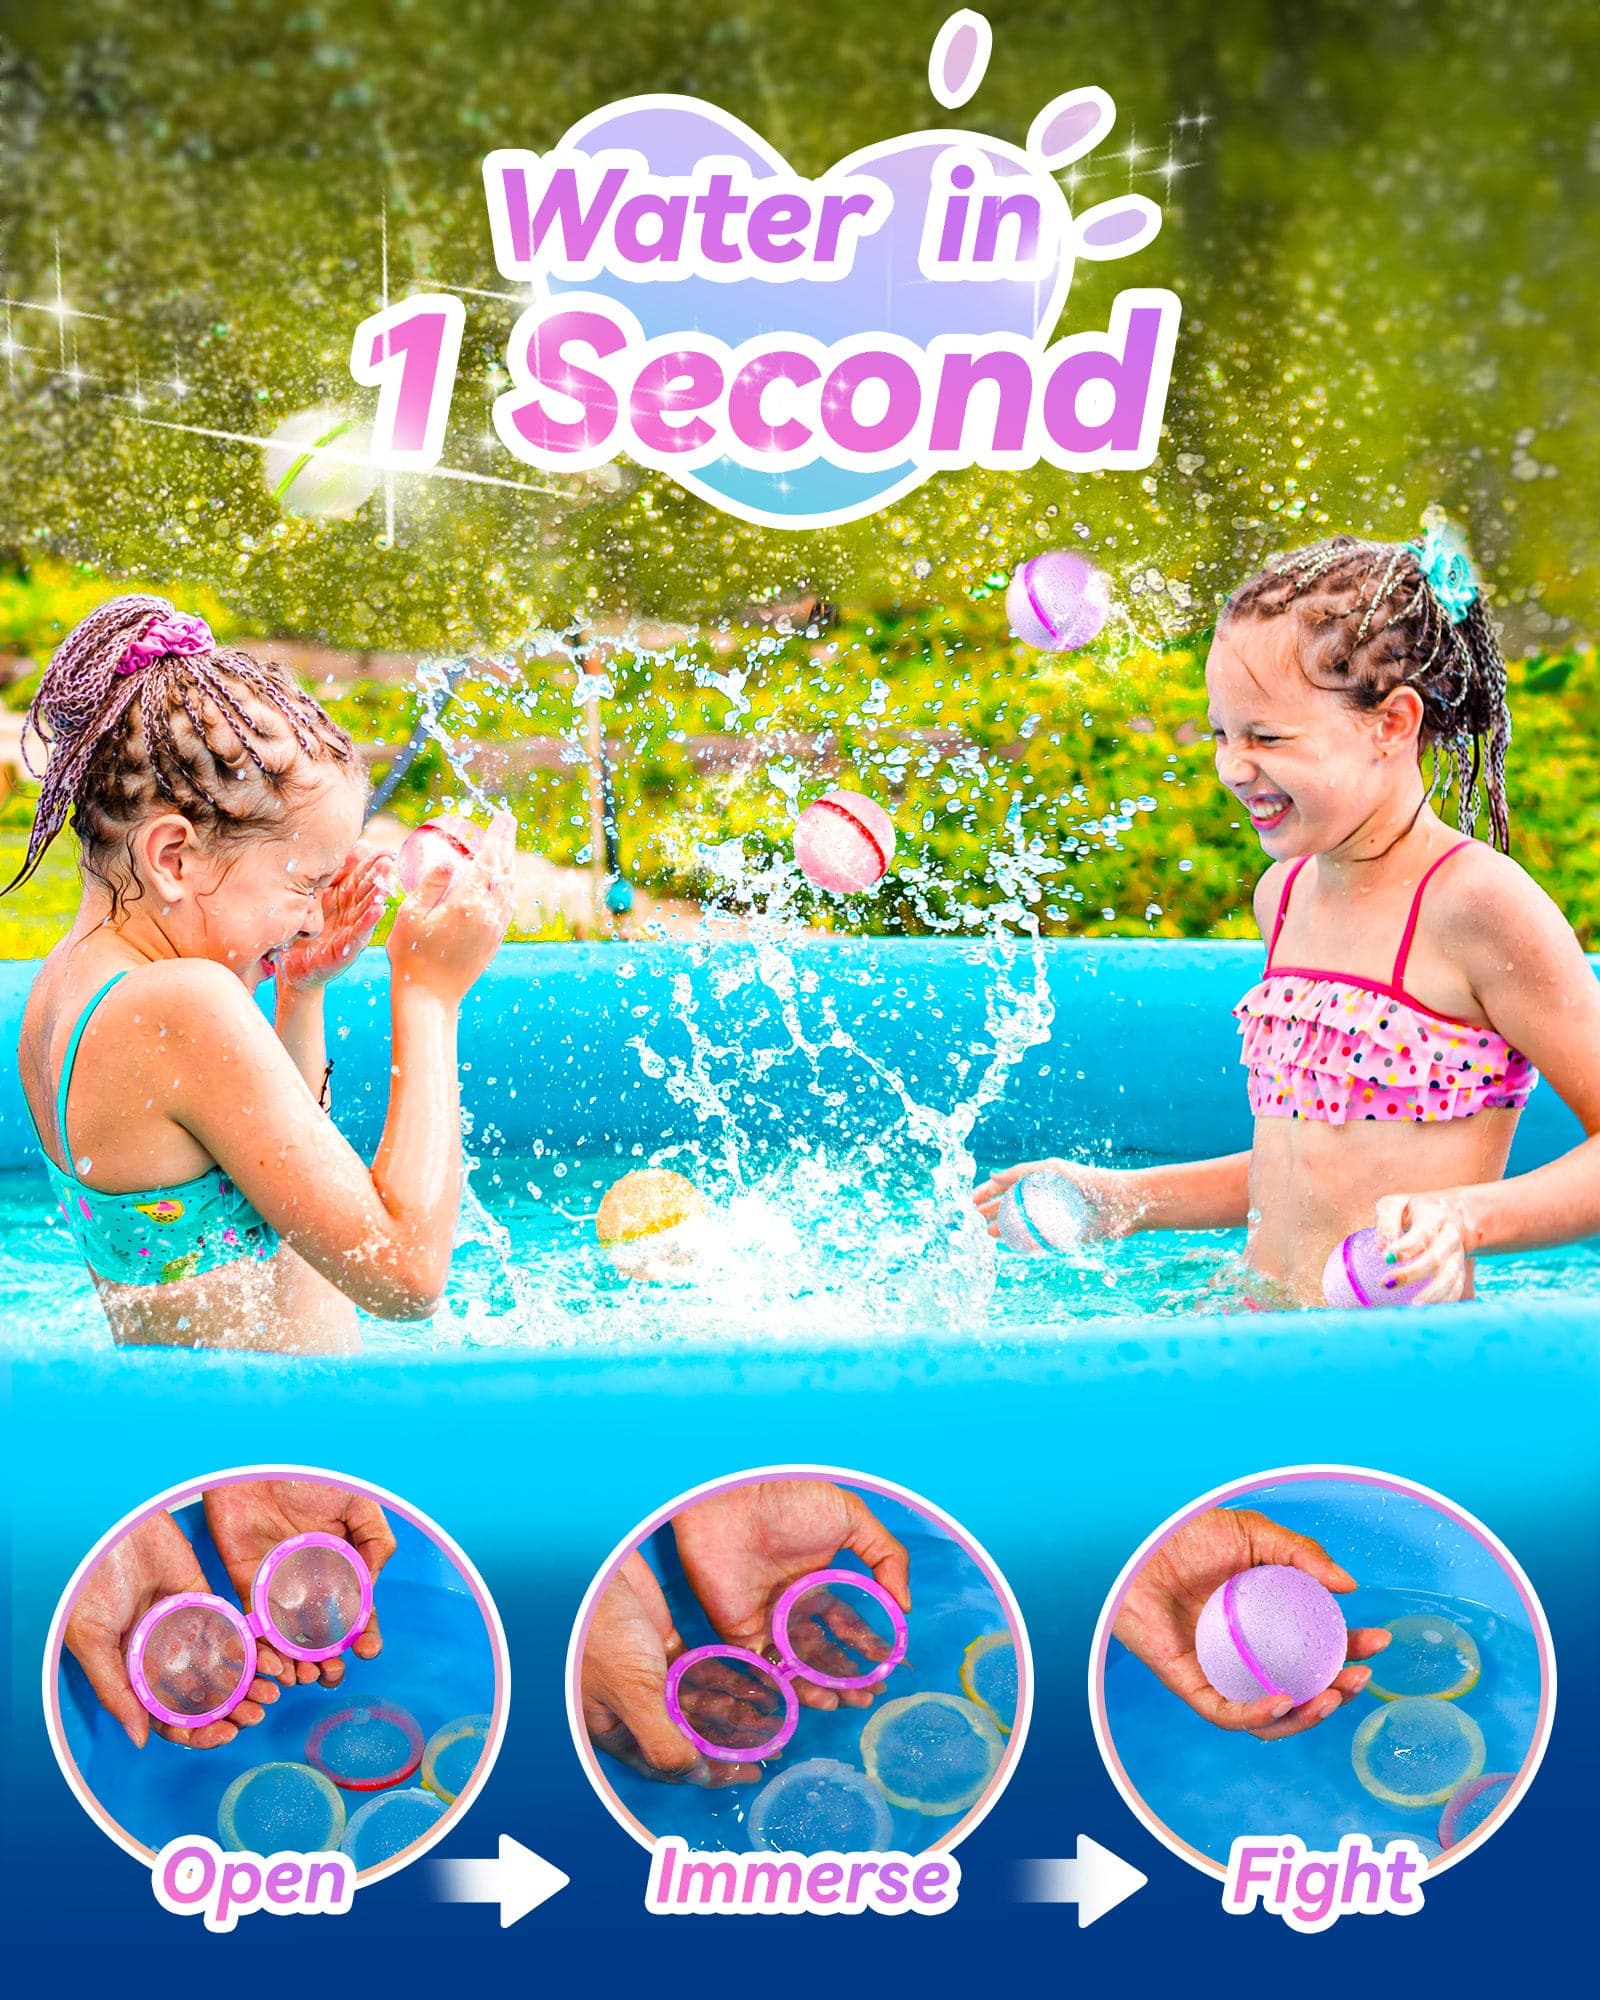 reusable water balloons, water balloons, refill water balloons, magnetic water balloons, water bombs, water fight, summer fun, games with water balloons, water balloons fight, water balloon games for adults, refillable water balloon, how to fill water balloon, balloon party idea, birthday party